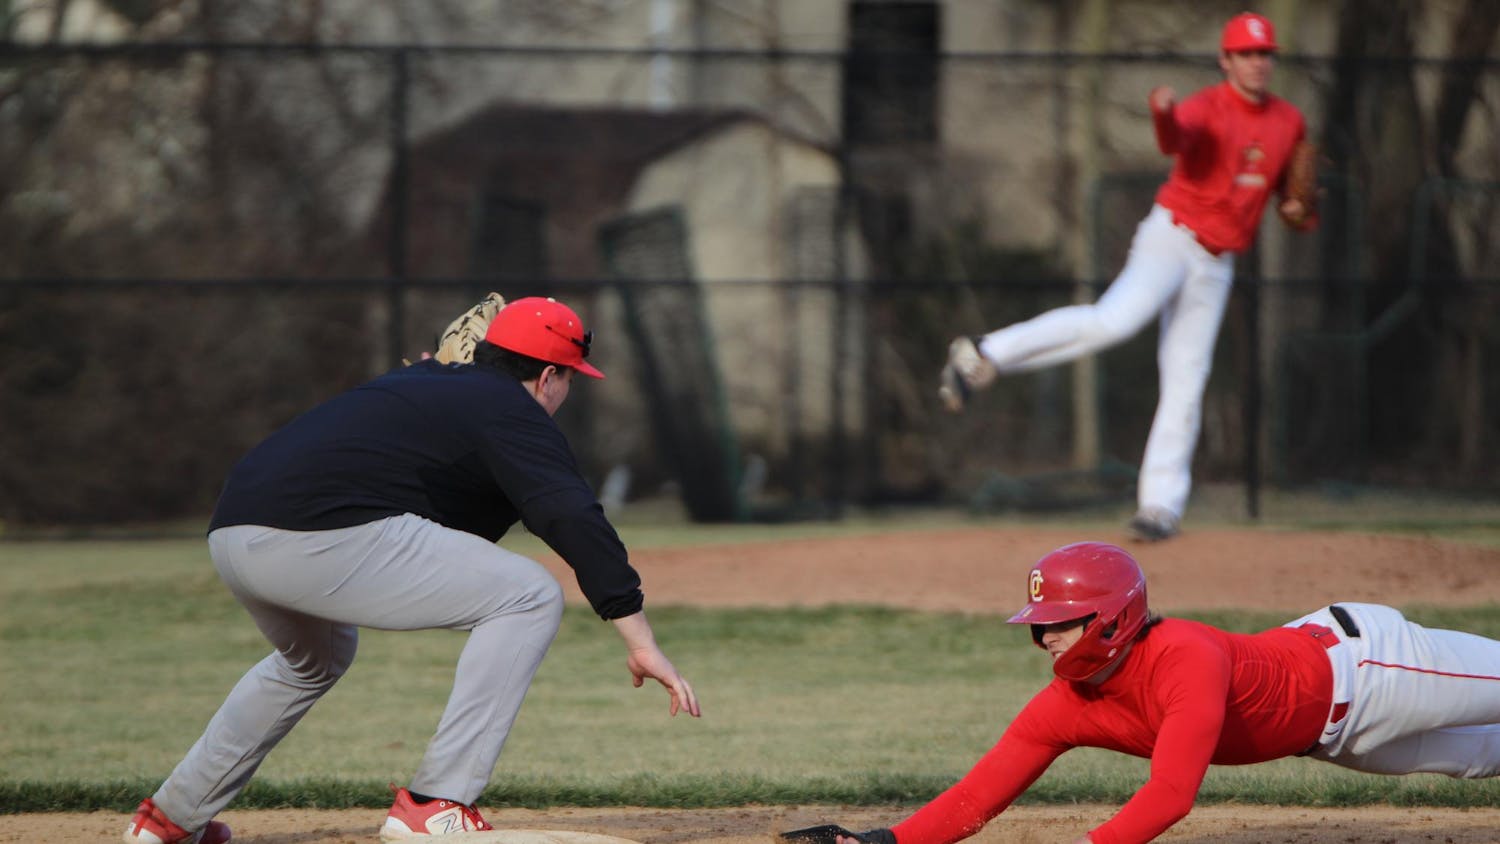 The player on base slid back to the first base in an attempt to be safe.